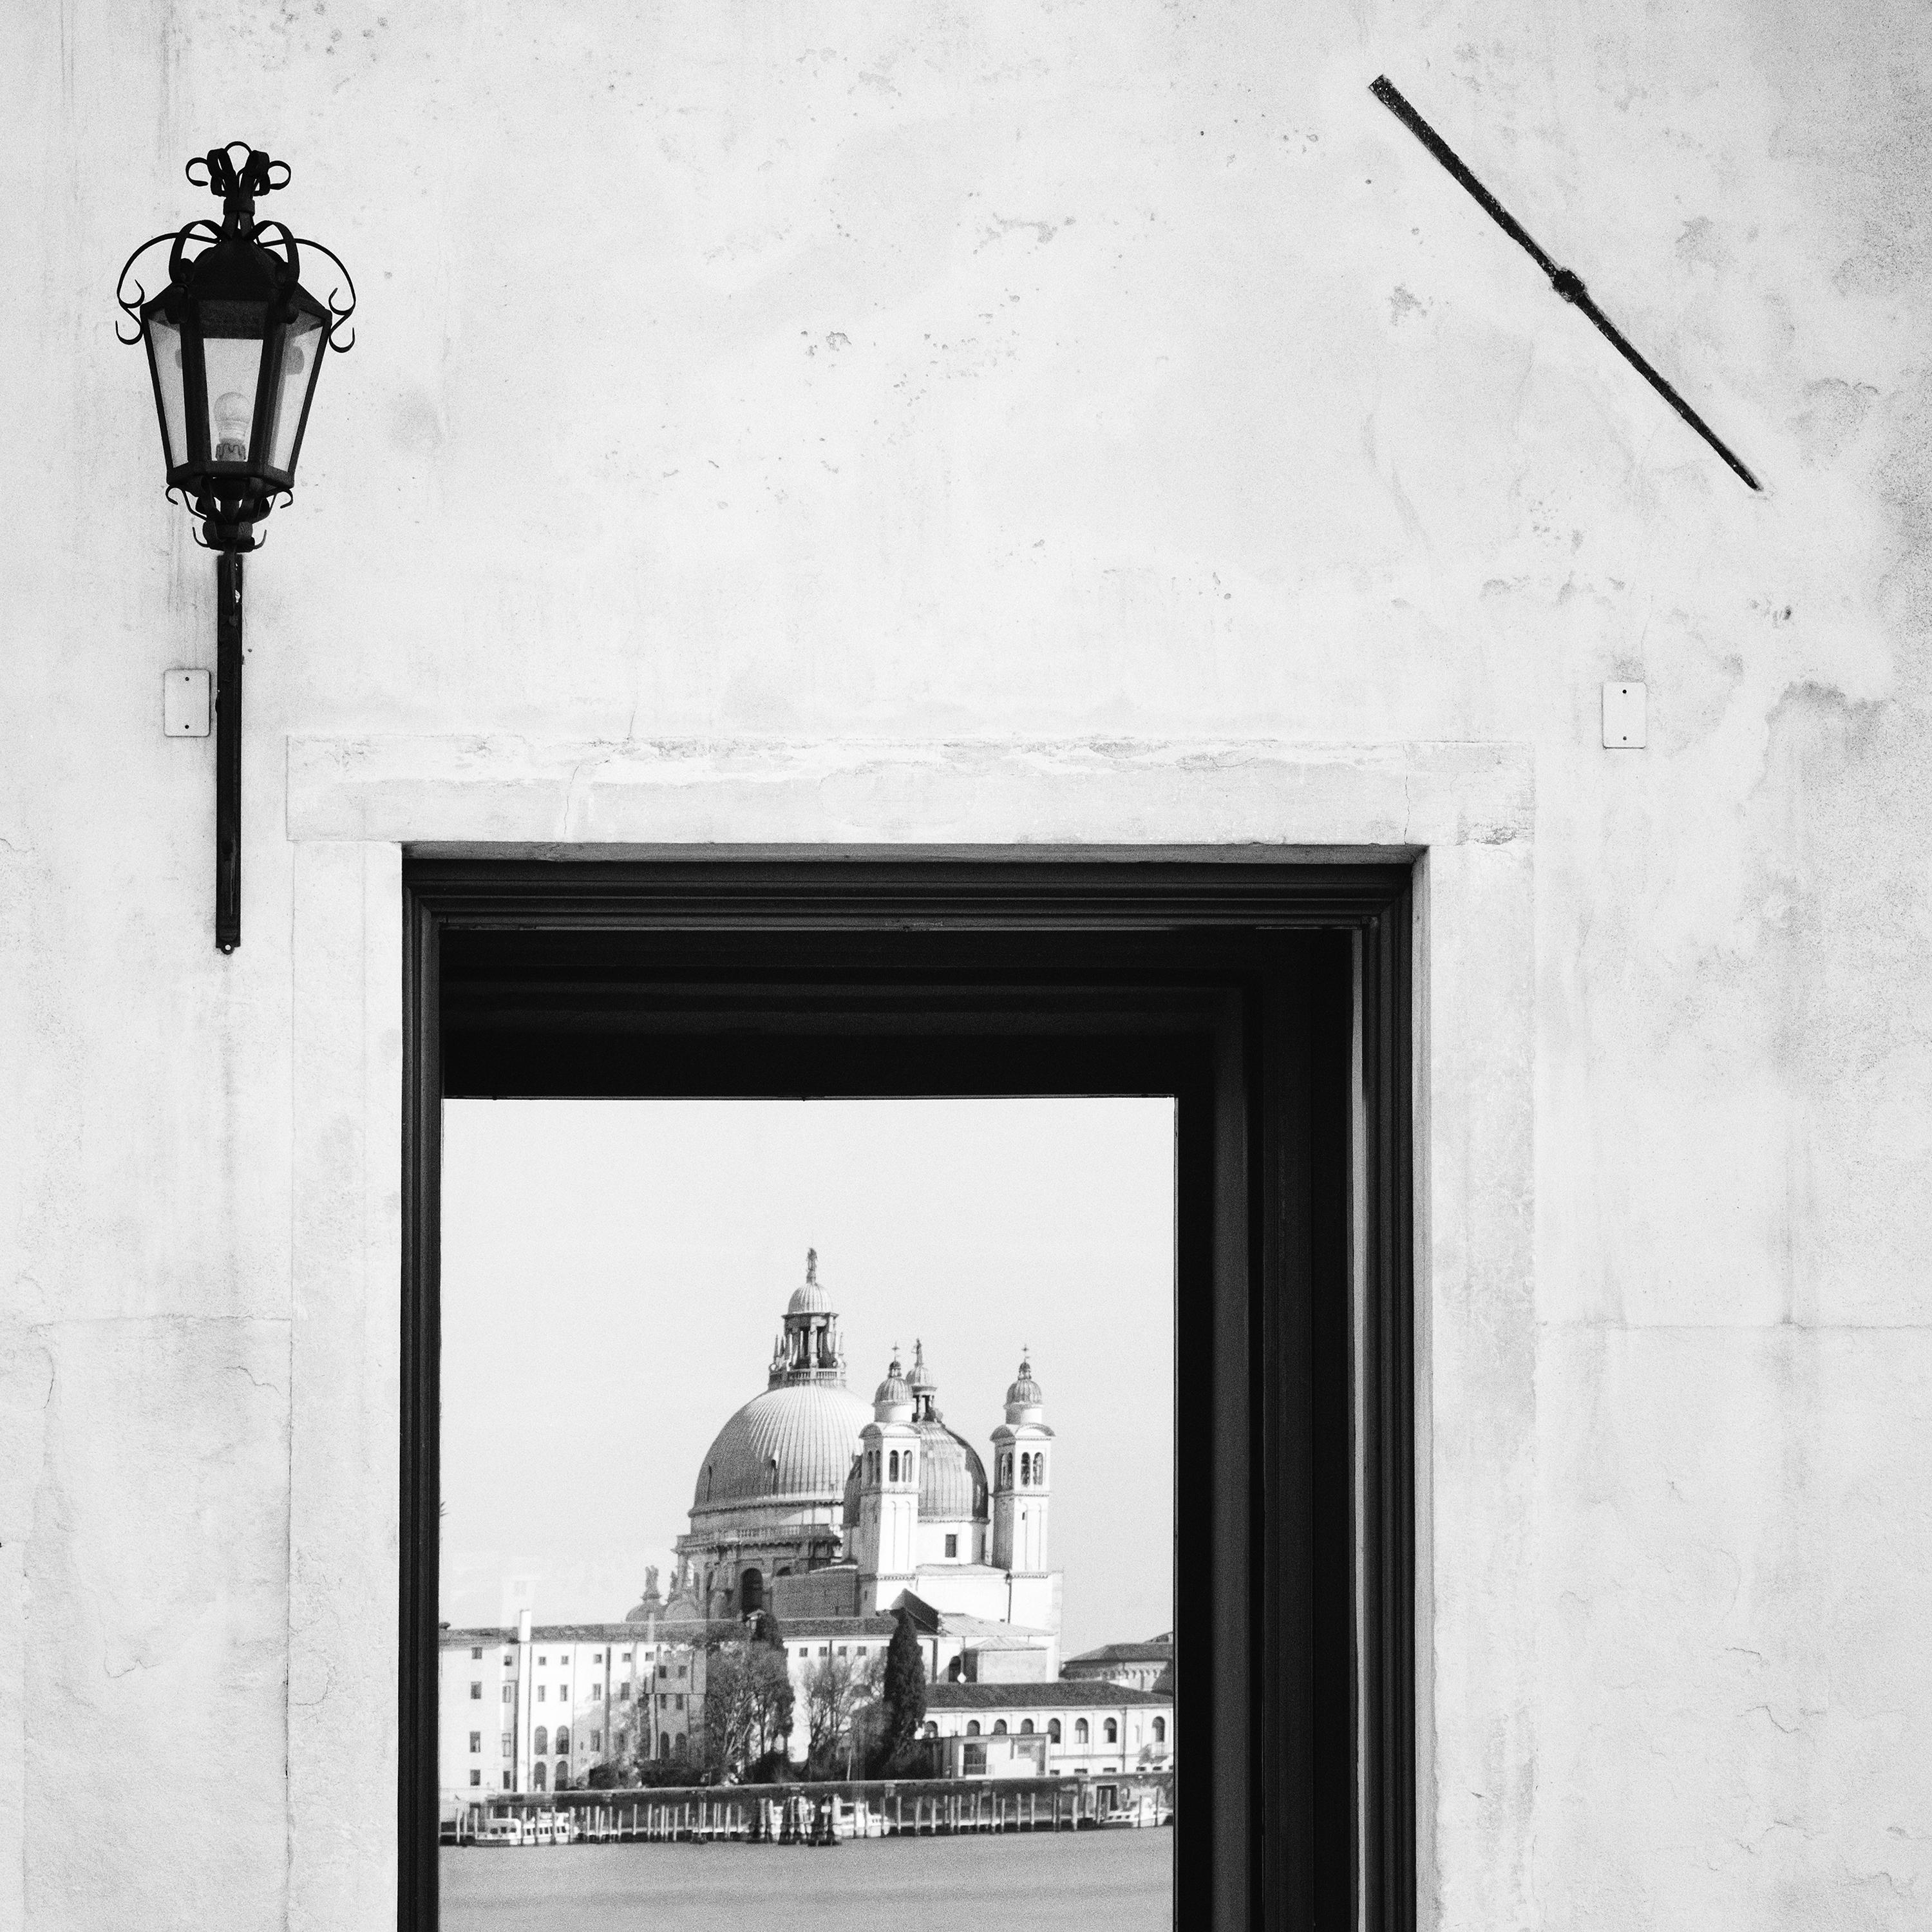 Reflection, Venice, Italy, black and white fine art landscape photography print For Sale 4